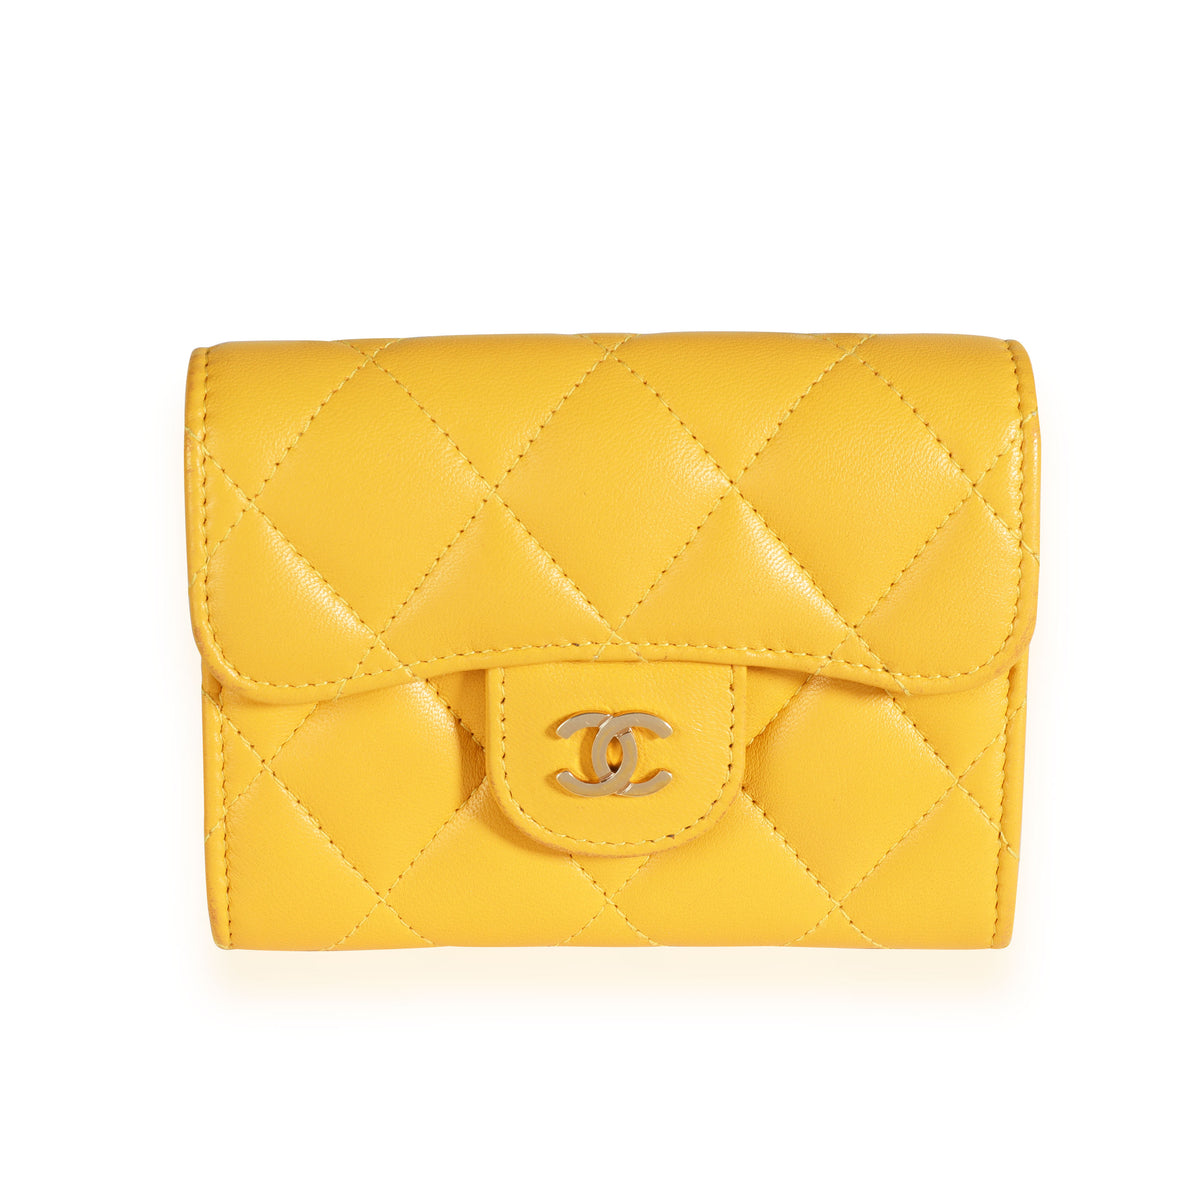 chanel cardholder On Sale - Authenticated Resale